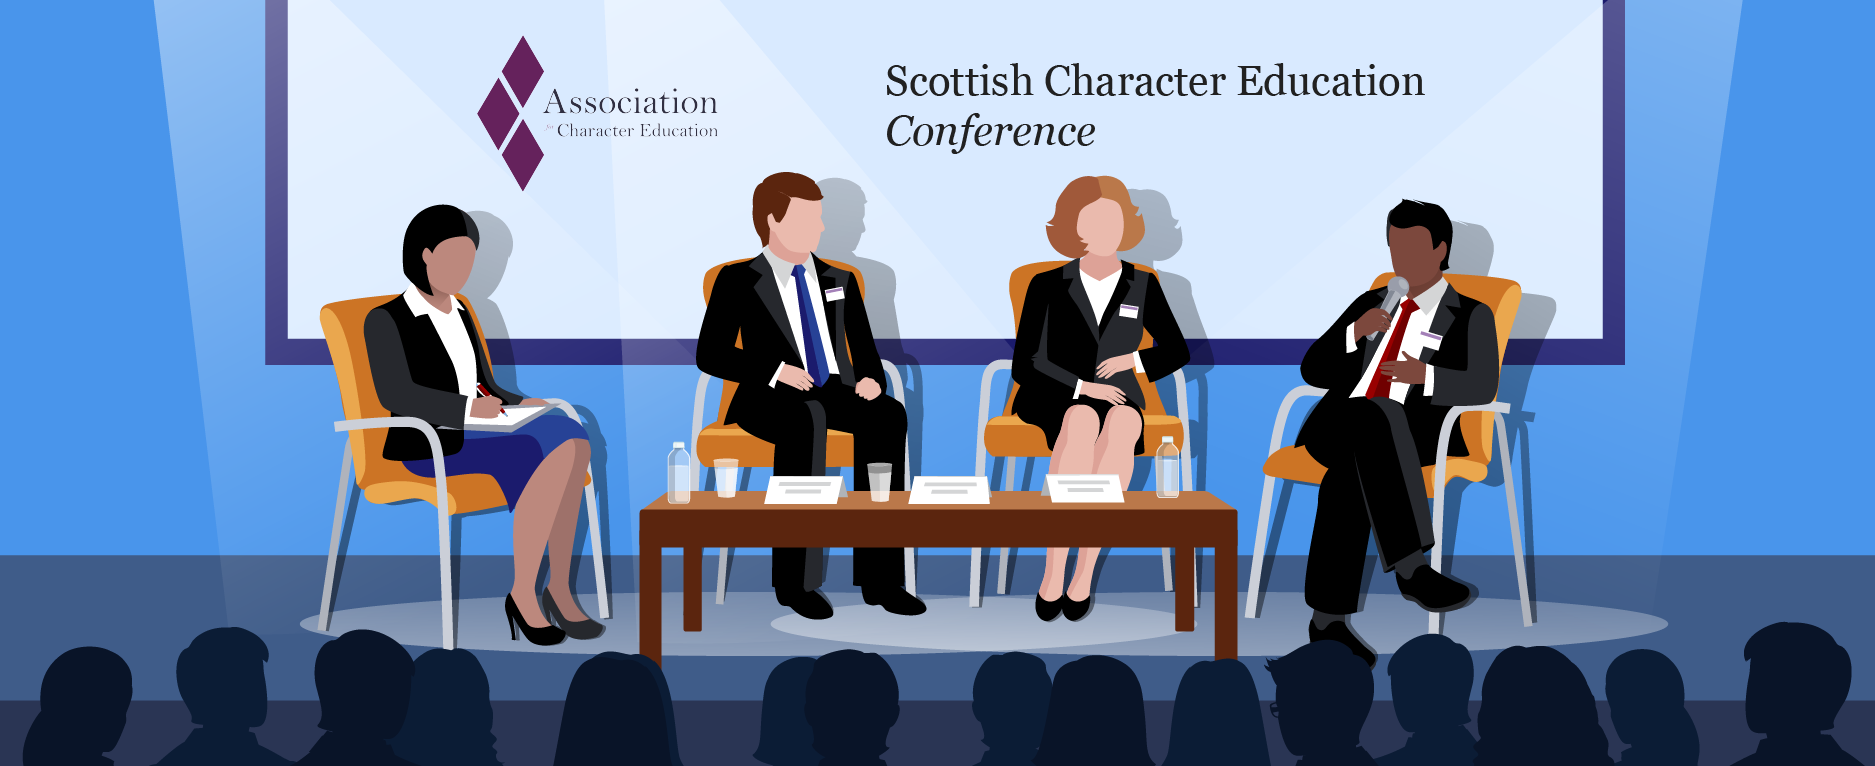 https://character-education.org.uk/scottish-character-education-conference/